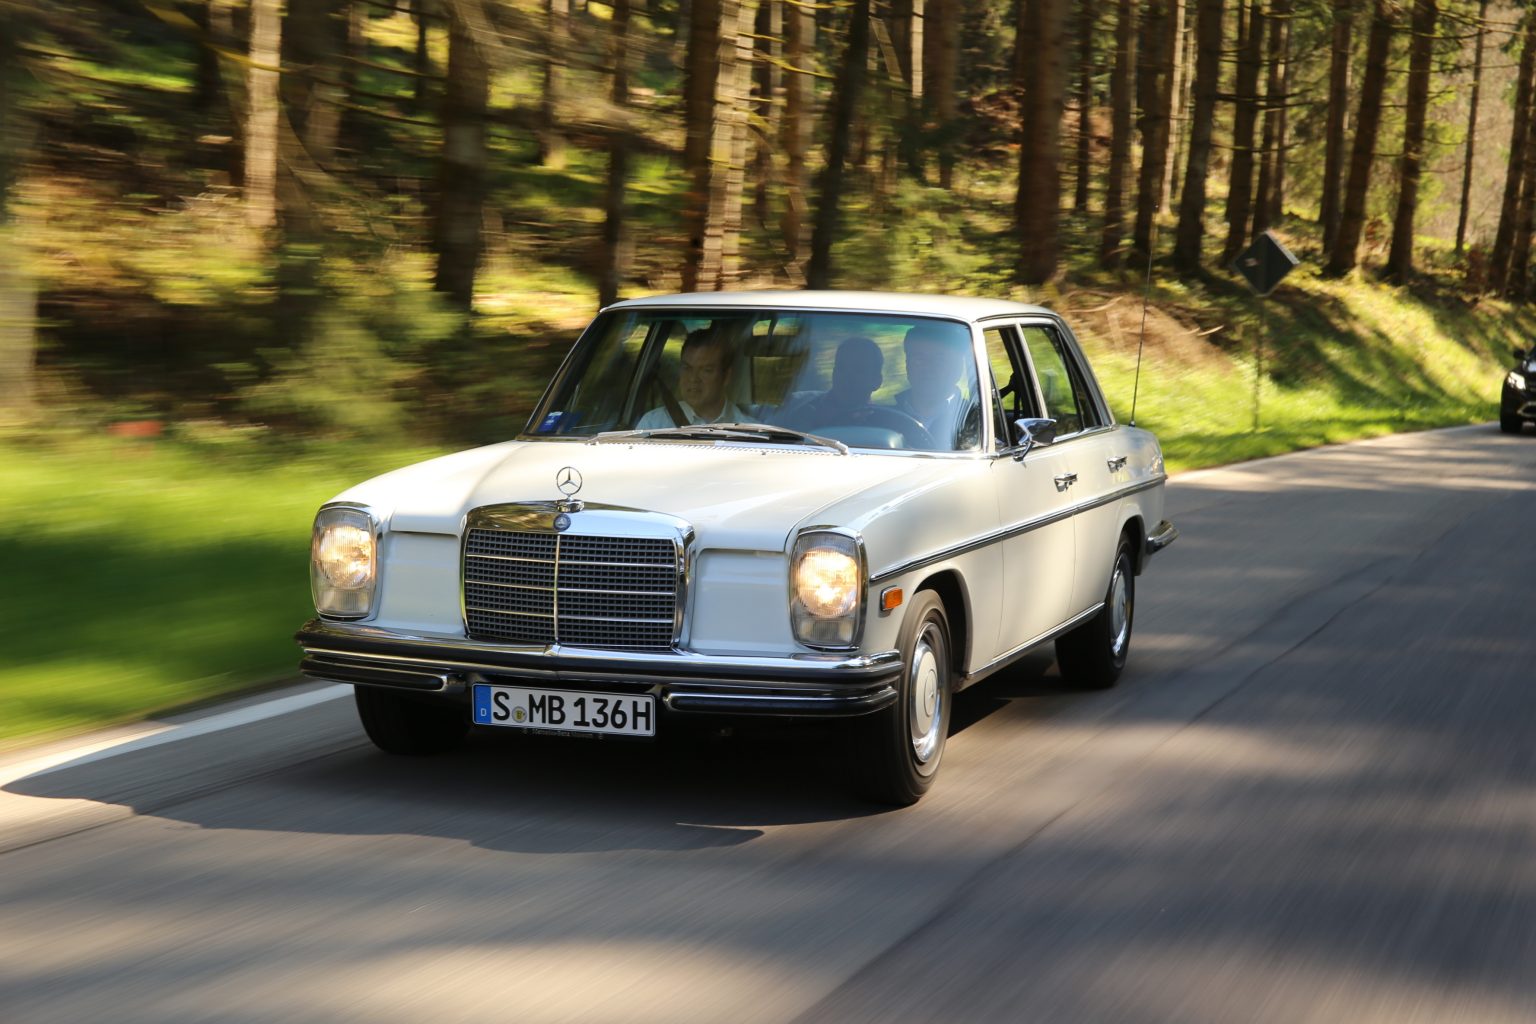 Mercedes-Benz 280 E Stroke/8 W 114. Moving vehicle. Photo from the Mercedes-Benz Classic Insight “History of the E-Class” from 19 to 22 April 2016.